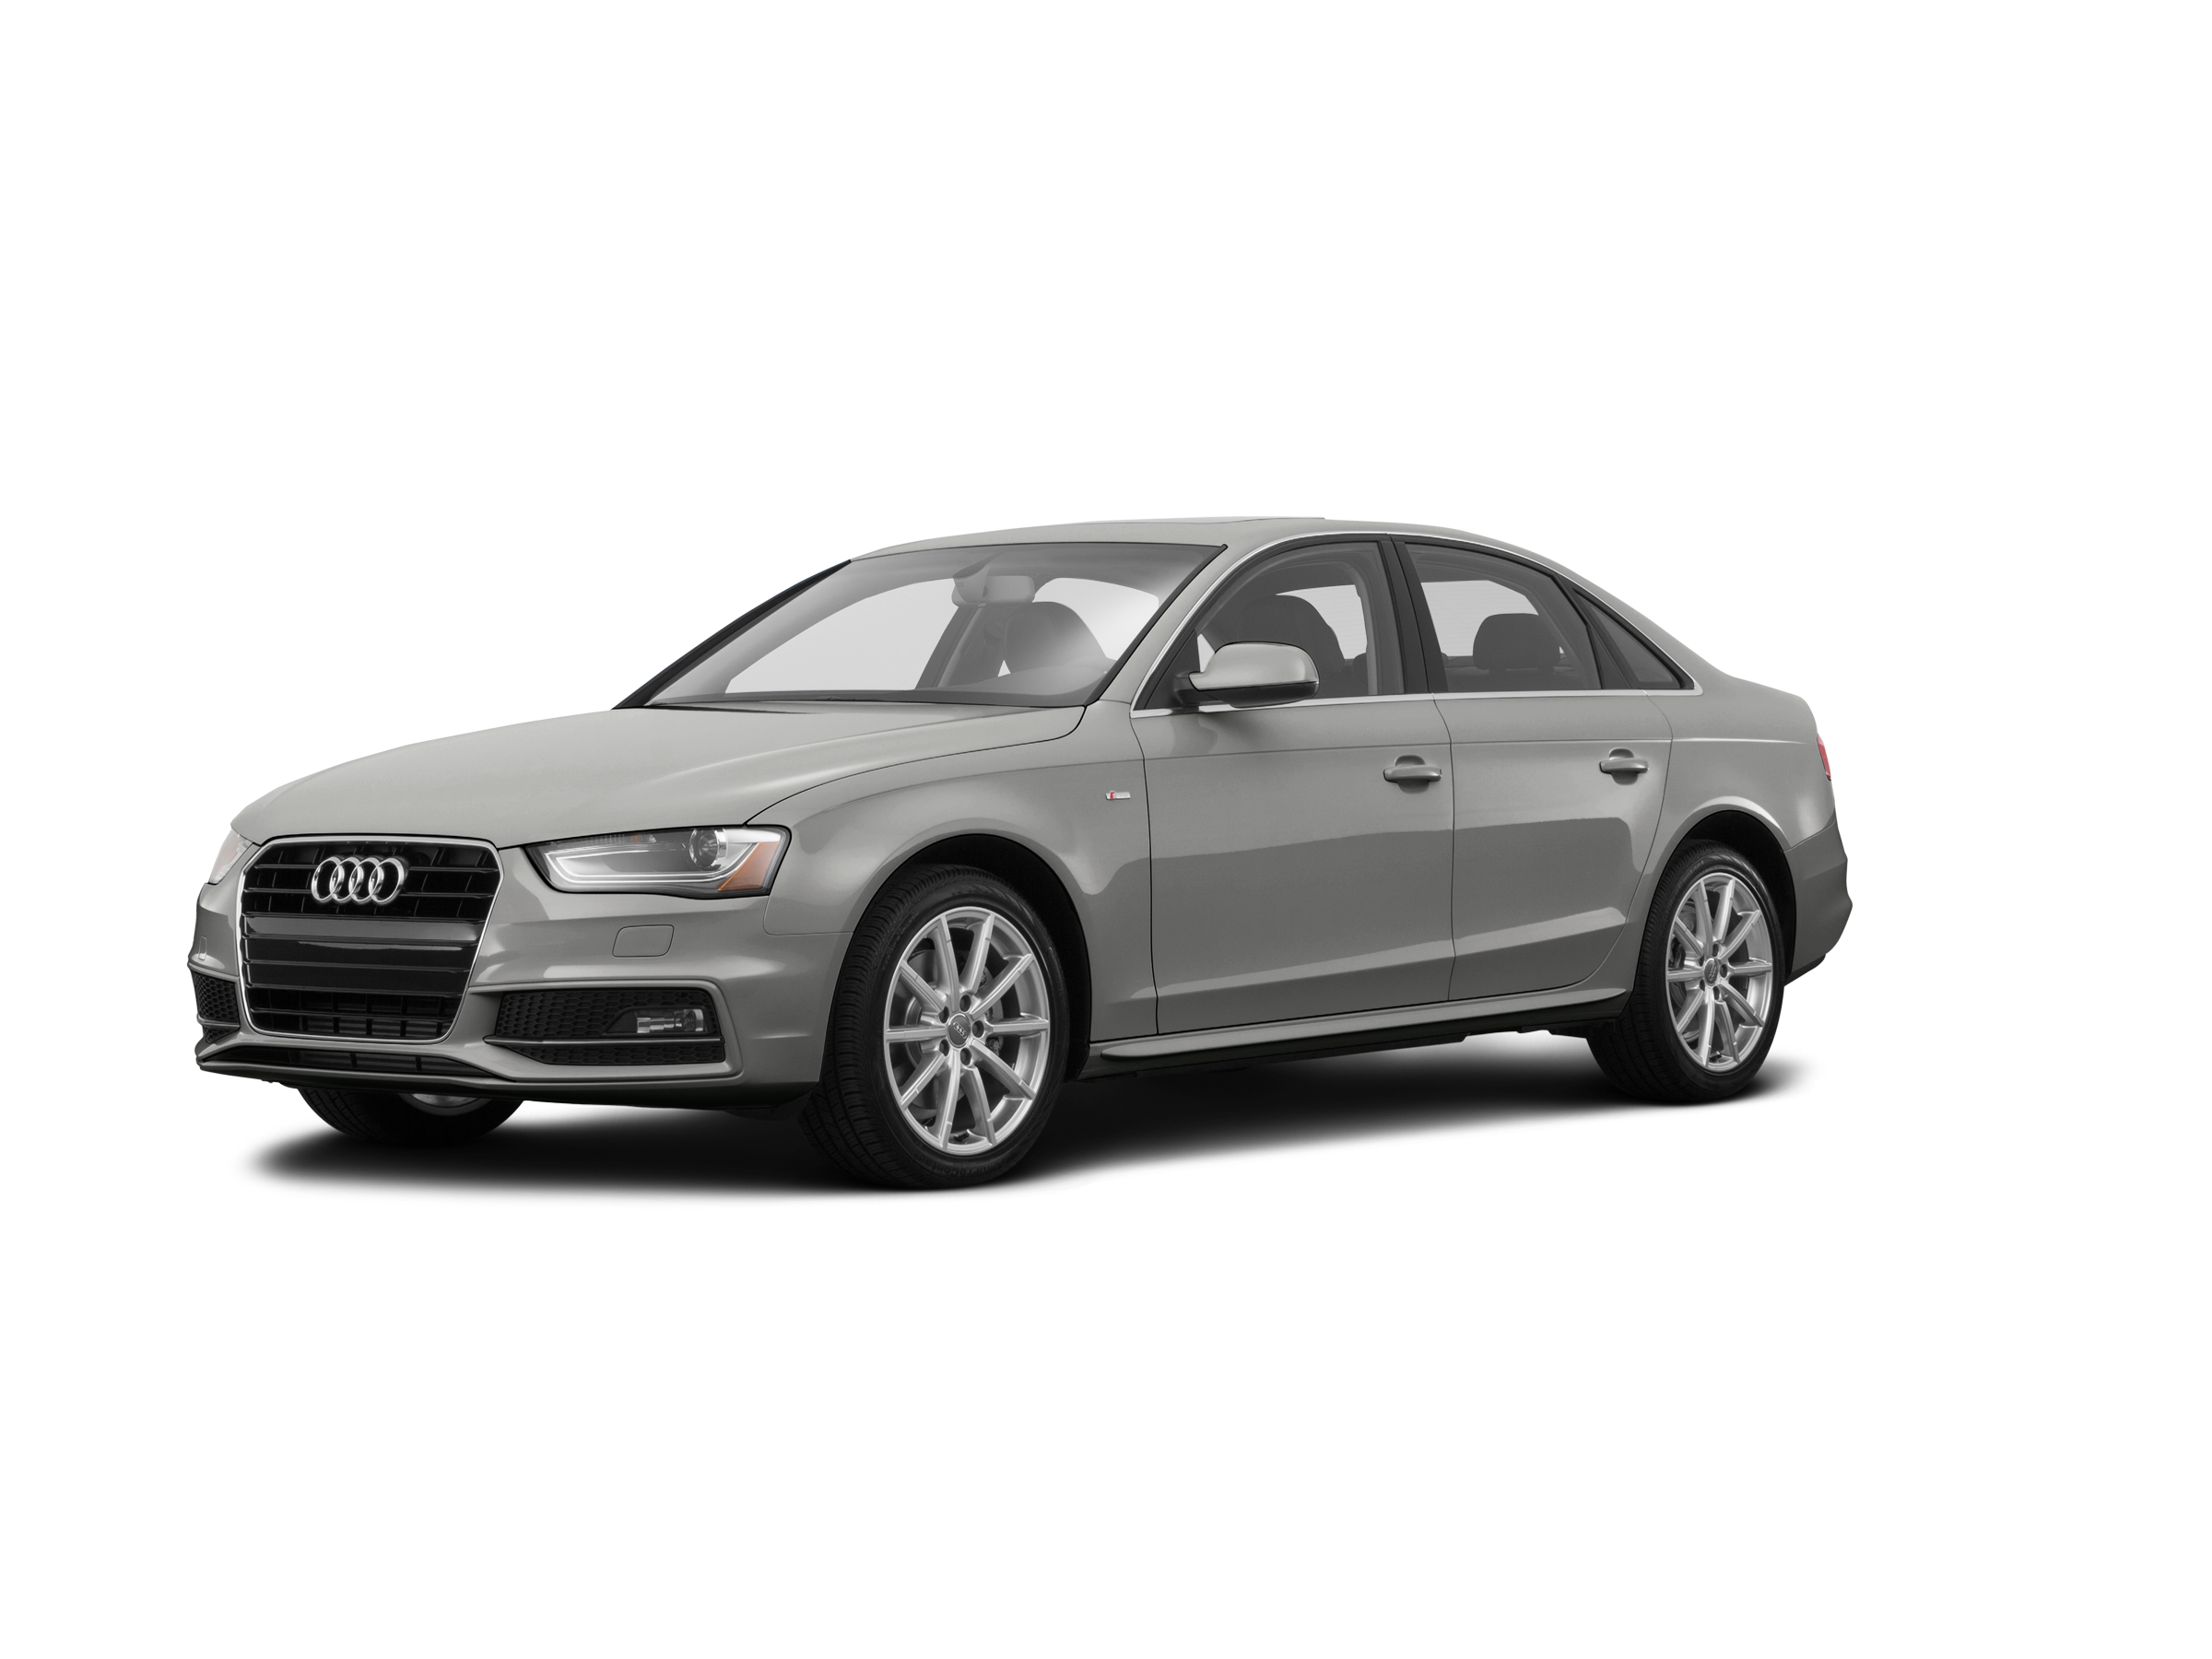 Review nhanh Audi A4 2016